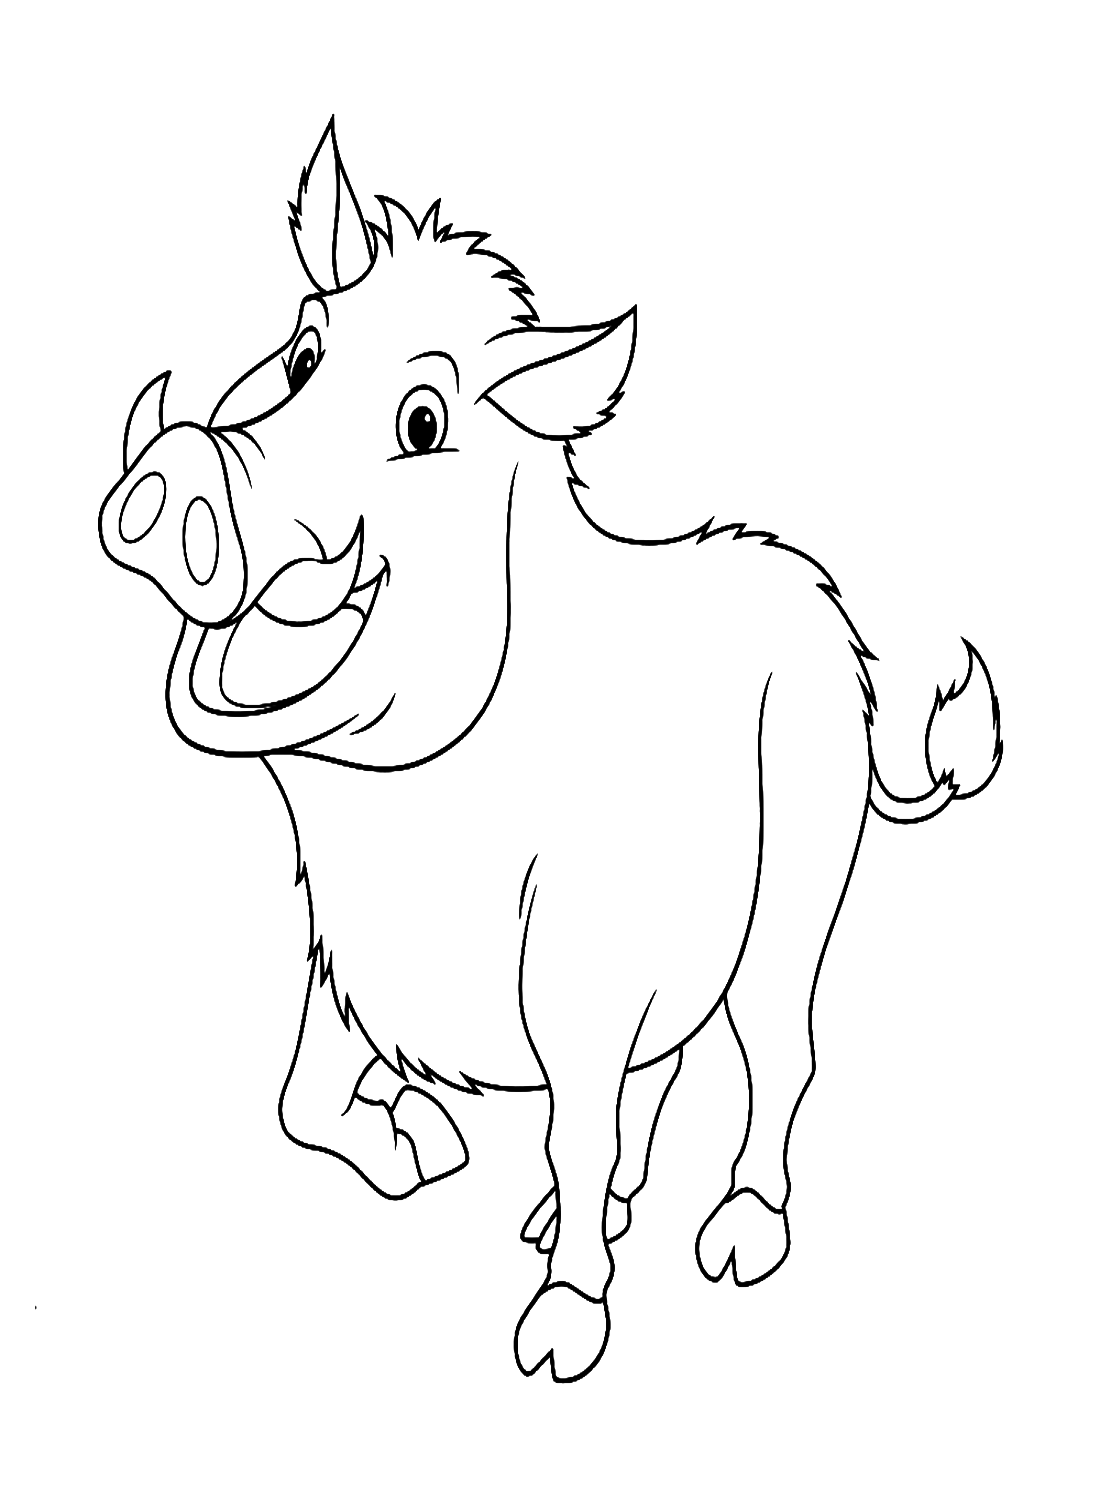 Excited Boar Coloring Page - Free Printable Coloring Pages